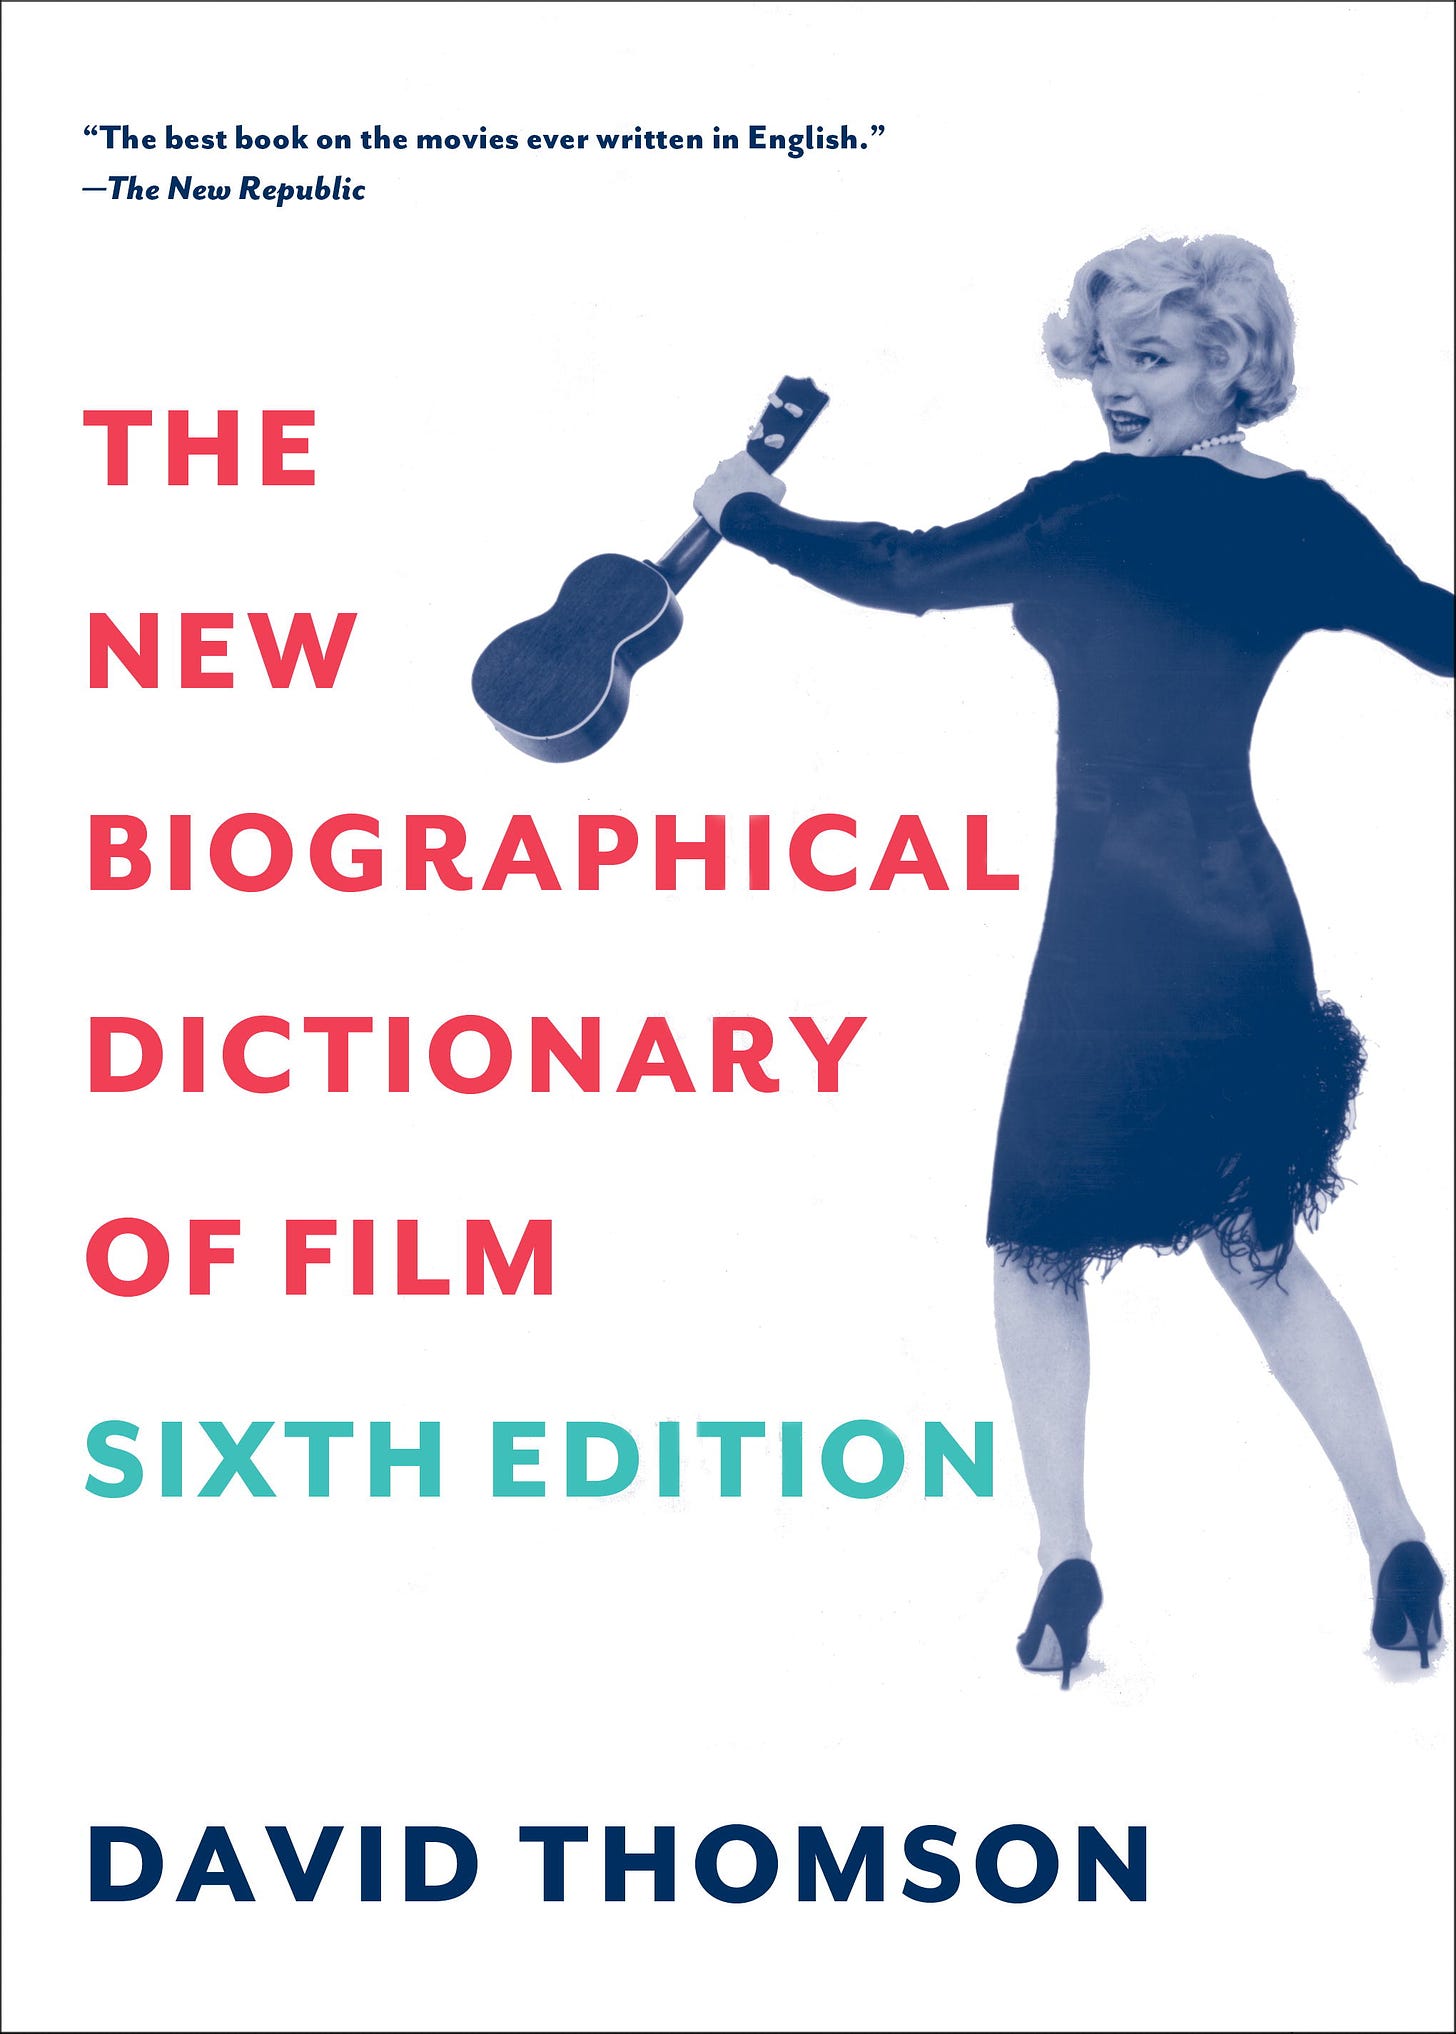 https://sanfranciscobookreview.com/wp-content/uploads/the-new-biographical-dictionary-of-film.jpg